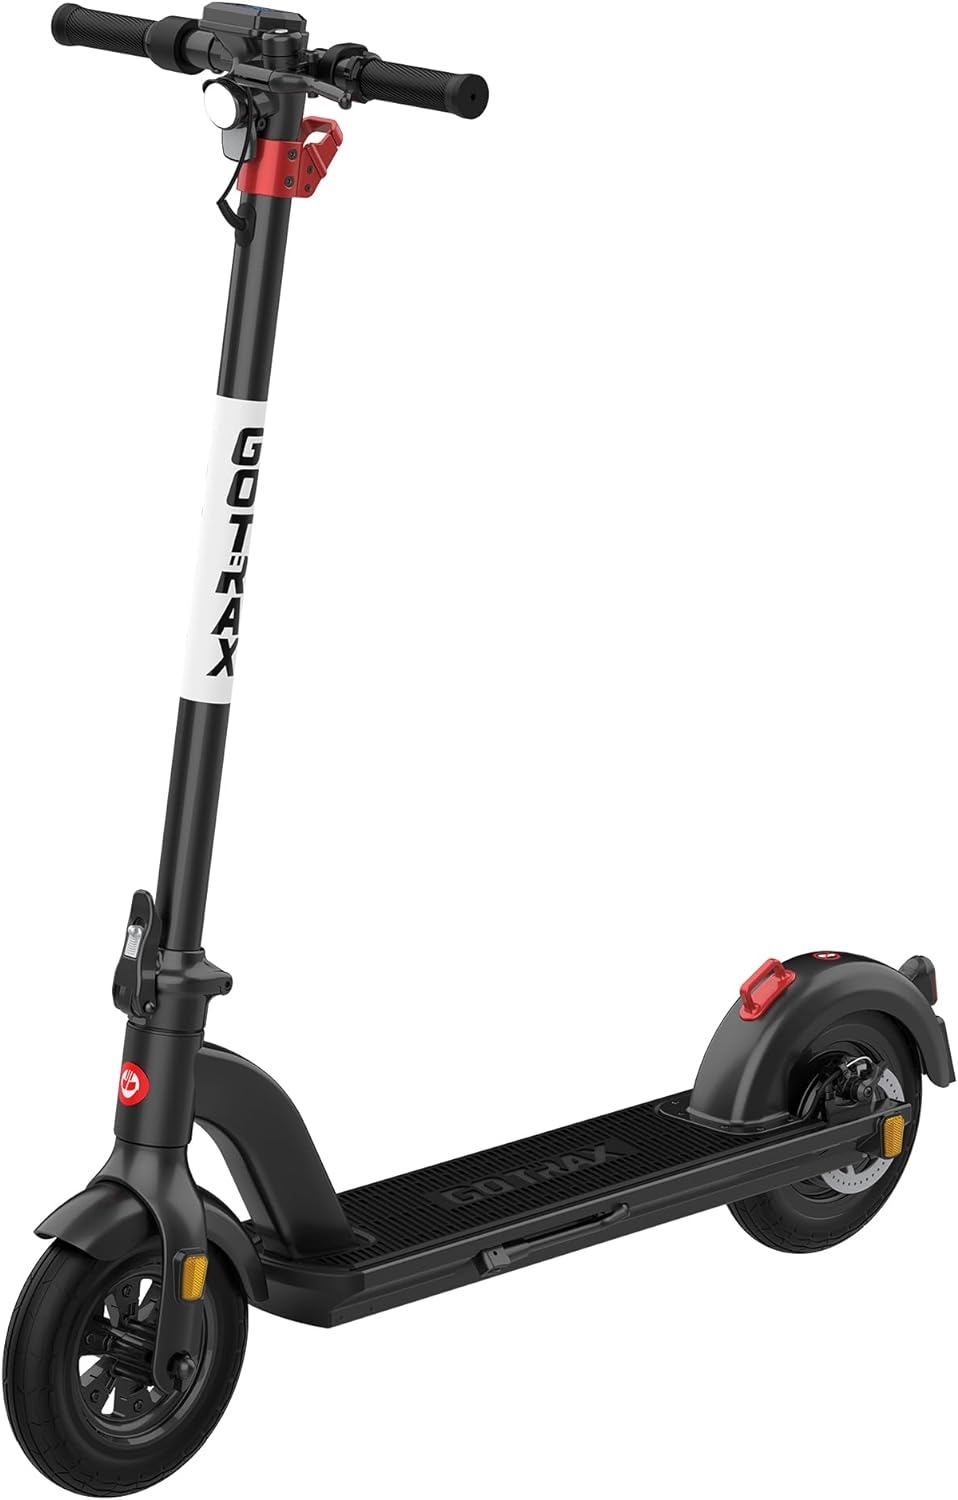 A Gotrax electric scooter